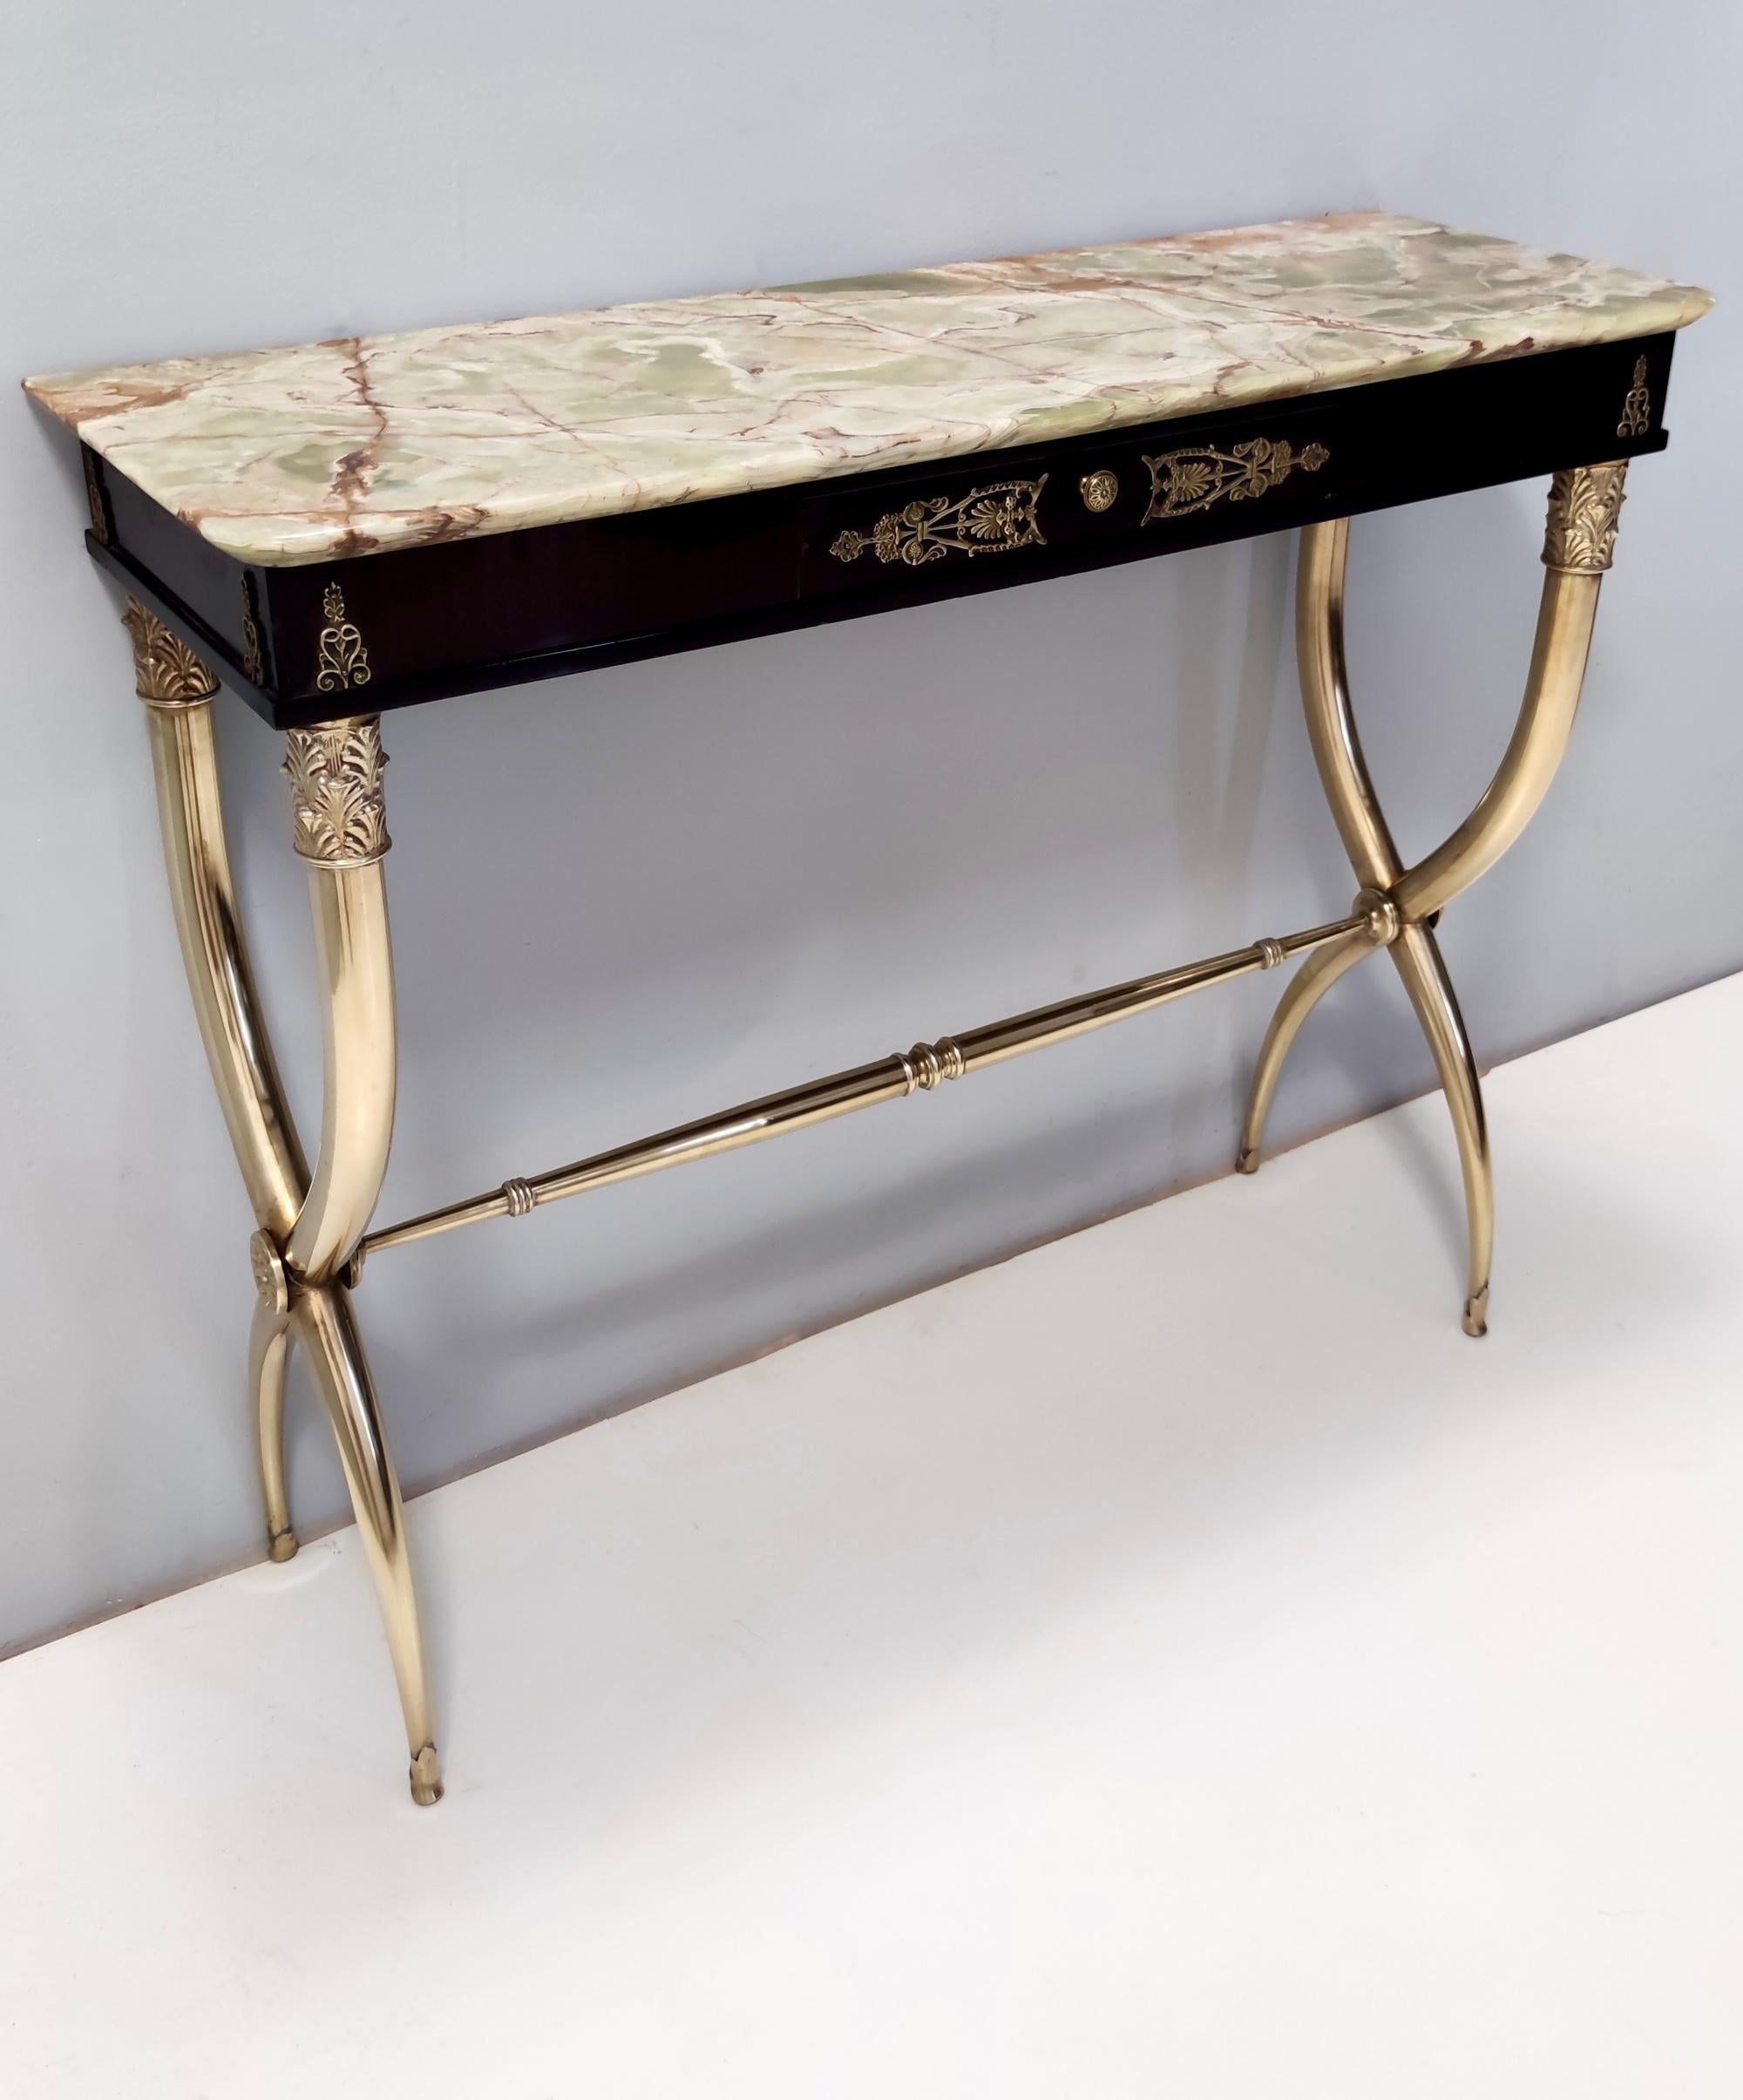 Vintage Brass and Walnut Console with an Onyx Top Ascribable to T. Buzzi, Italy 1